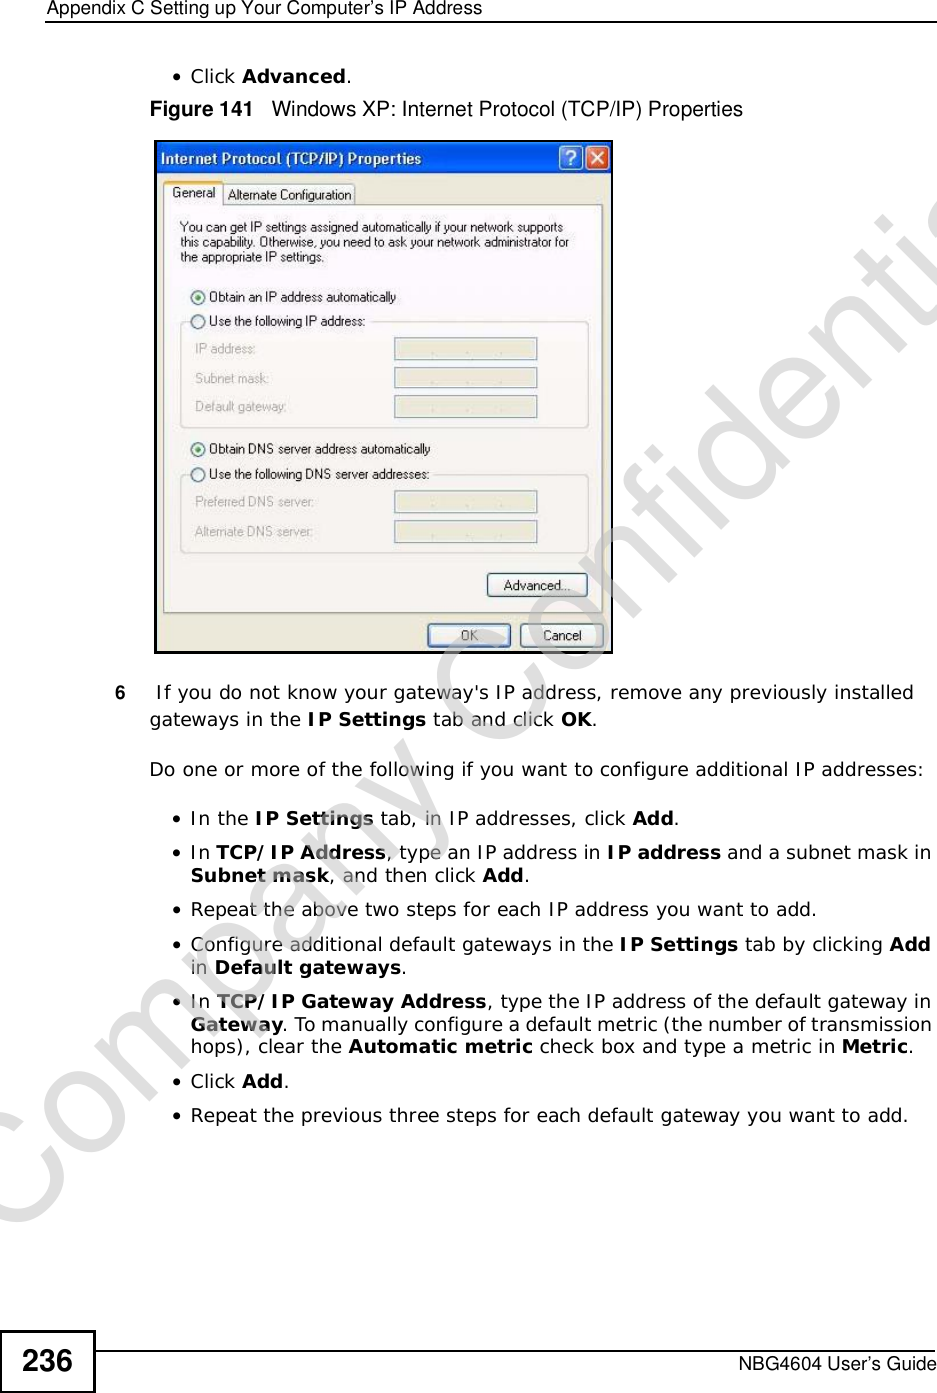 Appendix CSetting up Your Computer’s IP AddressNBG4604 User’s Guide236•Click Advanced.Figure 141   Windows XP: Internet Protocol (TCP/IP) Properties6 If you do not know your gateway&apos;s IP address, remove any previously installed gateways in the IP Settings tab and click OK.Do one or more of the following if you want to configure additional IP addresses:•In the IP Settings tab, in IP addresses, click Add.•In TCP/IP Address, type an IP address in IP address and a subnet mask in Subnet mask, and then click Add.•Repeat the above two steps for each IP address you want to add.•Configure additional default gateways in the IP Settings tab by clicking Addin Default gateways.•In TCP/IP Gateway Address, type the IP address of the default gateway in Gateway. To manually configure a default metric (the number of transmission hops), clear the Automatic metric check box and type a metric in Metric.•Click Add.•Repeat the previous three steps for each default gateway you want to add.Company Confidential